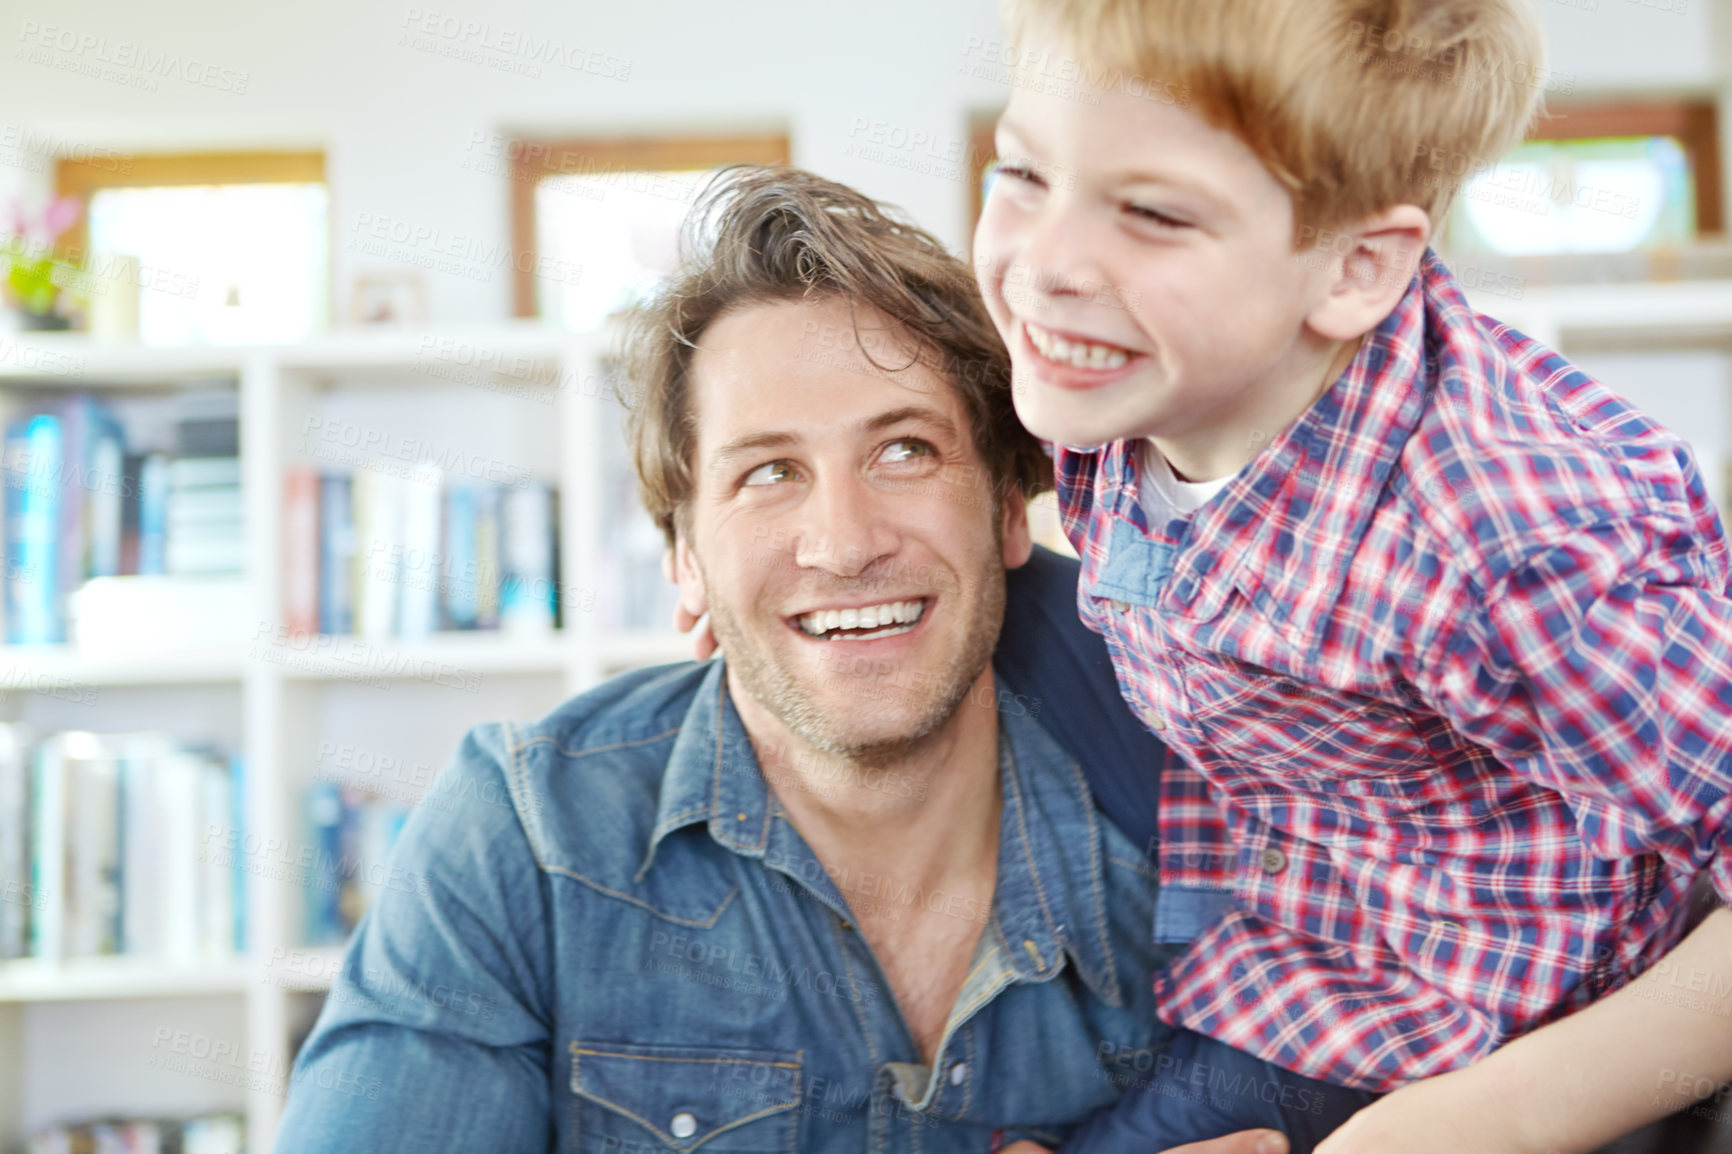 Buy stock photo Shot of a young father and son spending time together at home